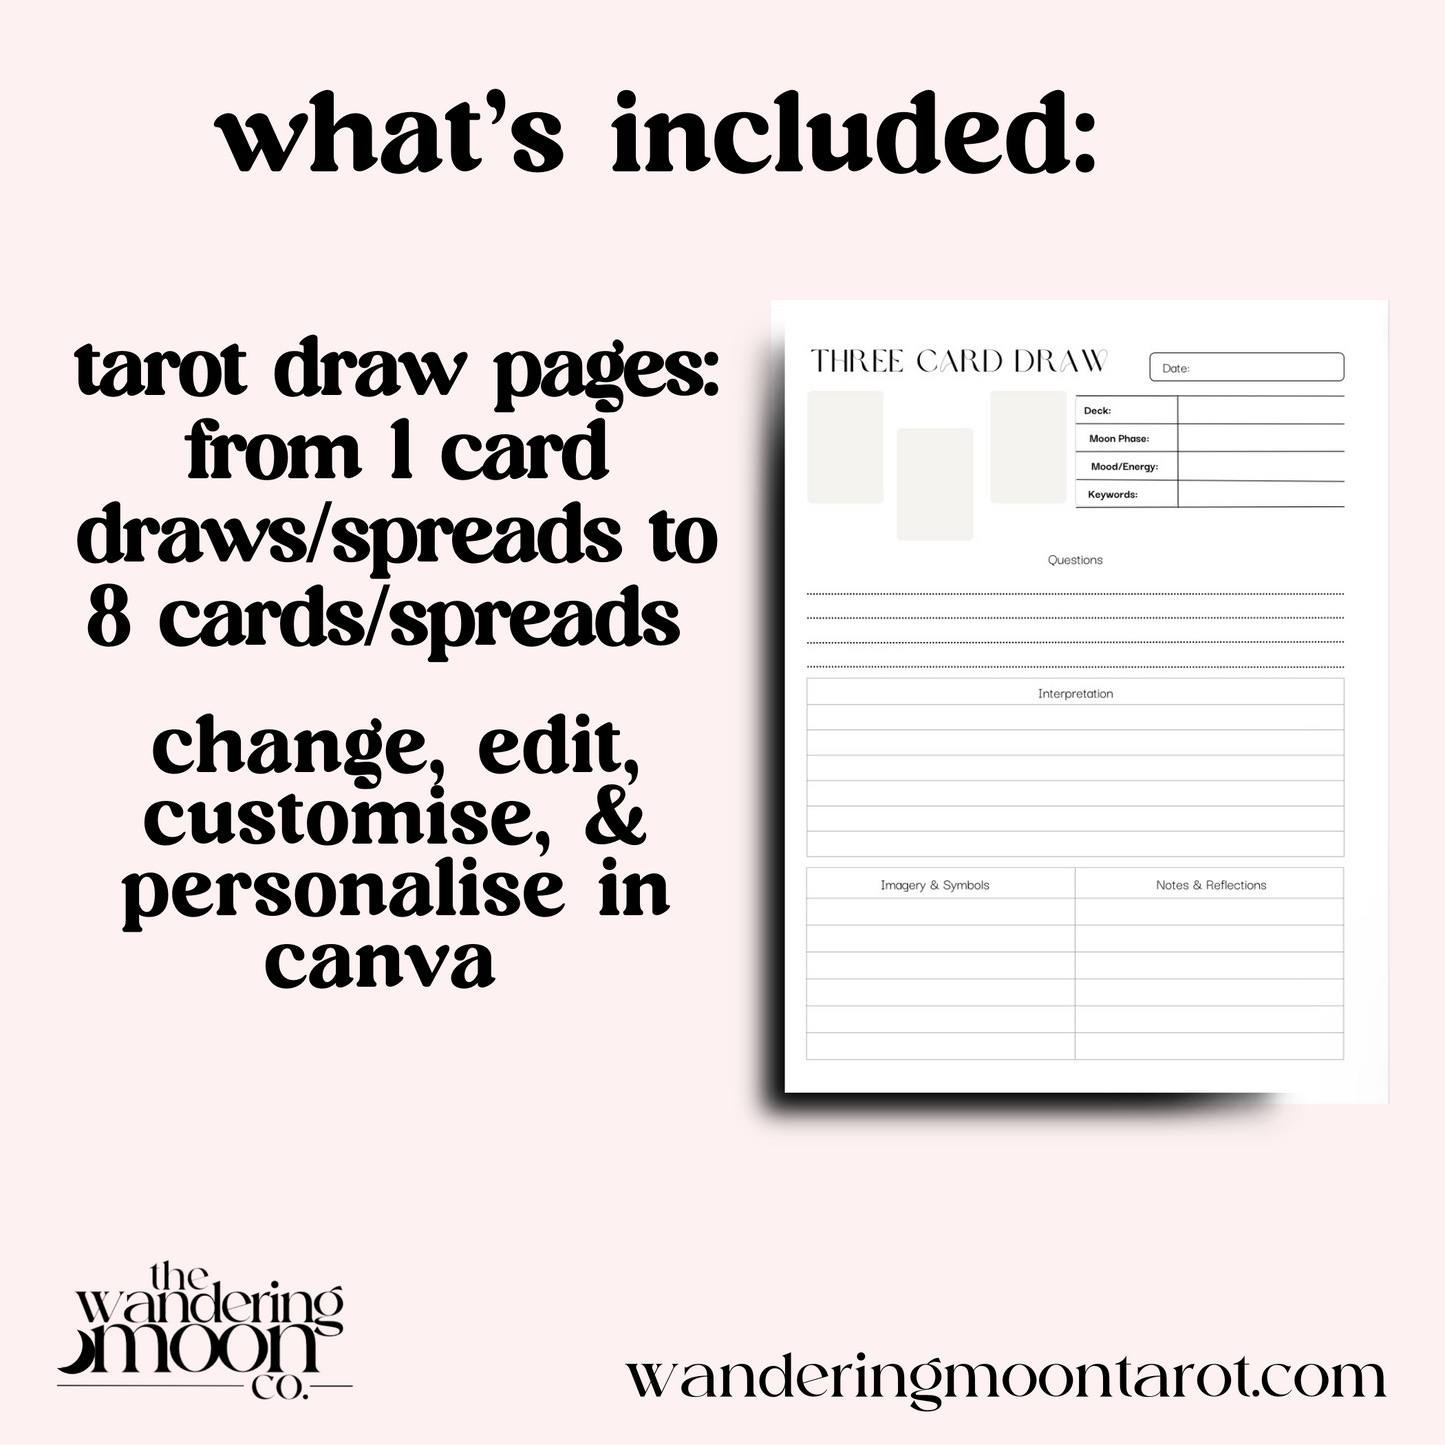 canva template: tarot journal, 47 pages